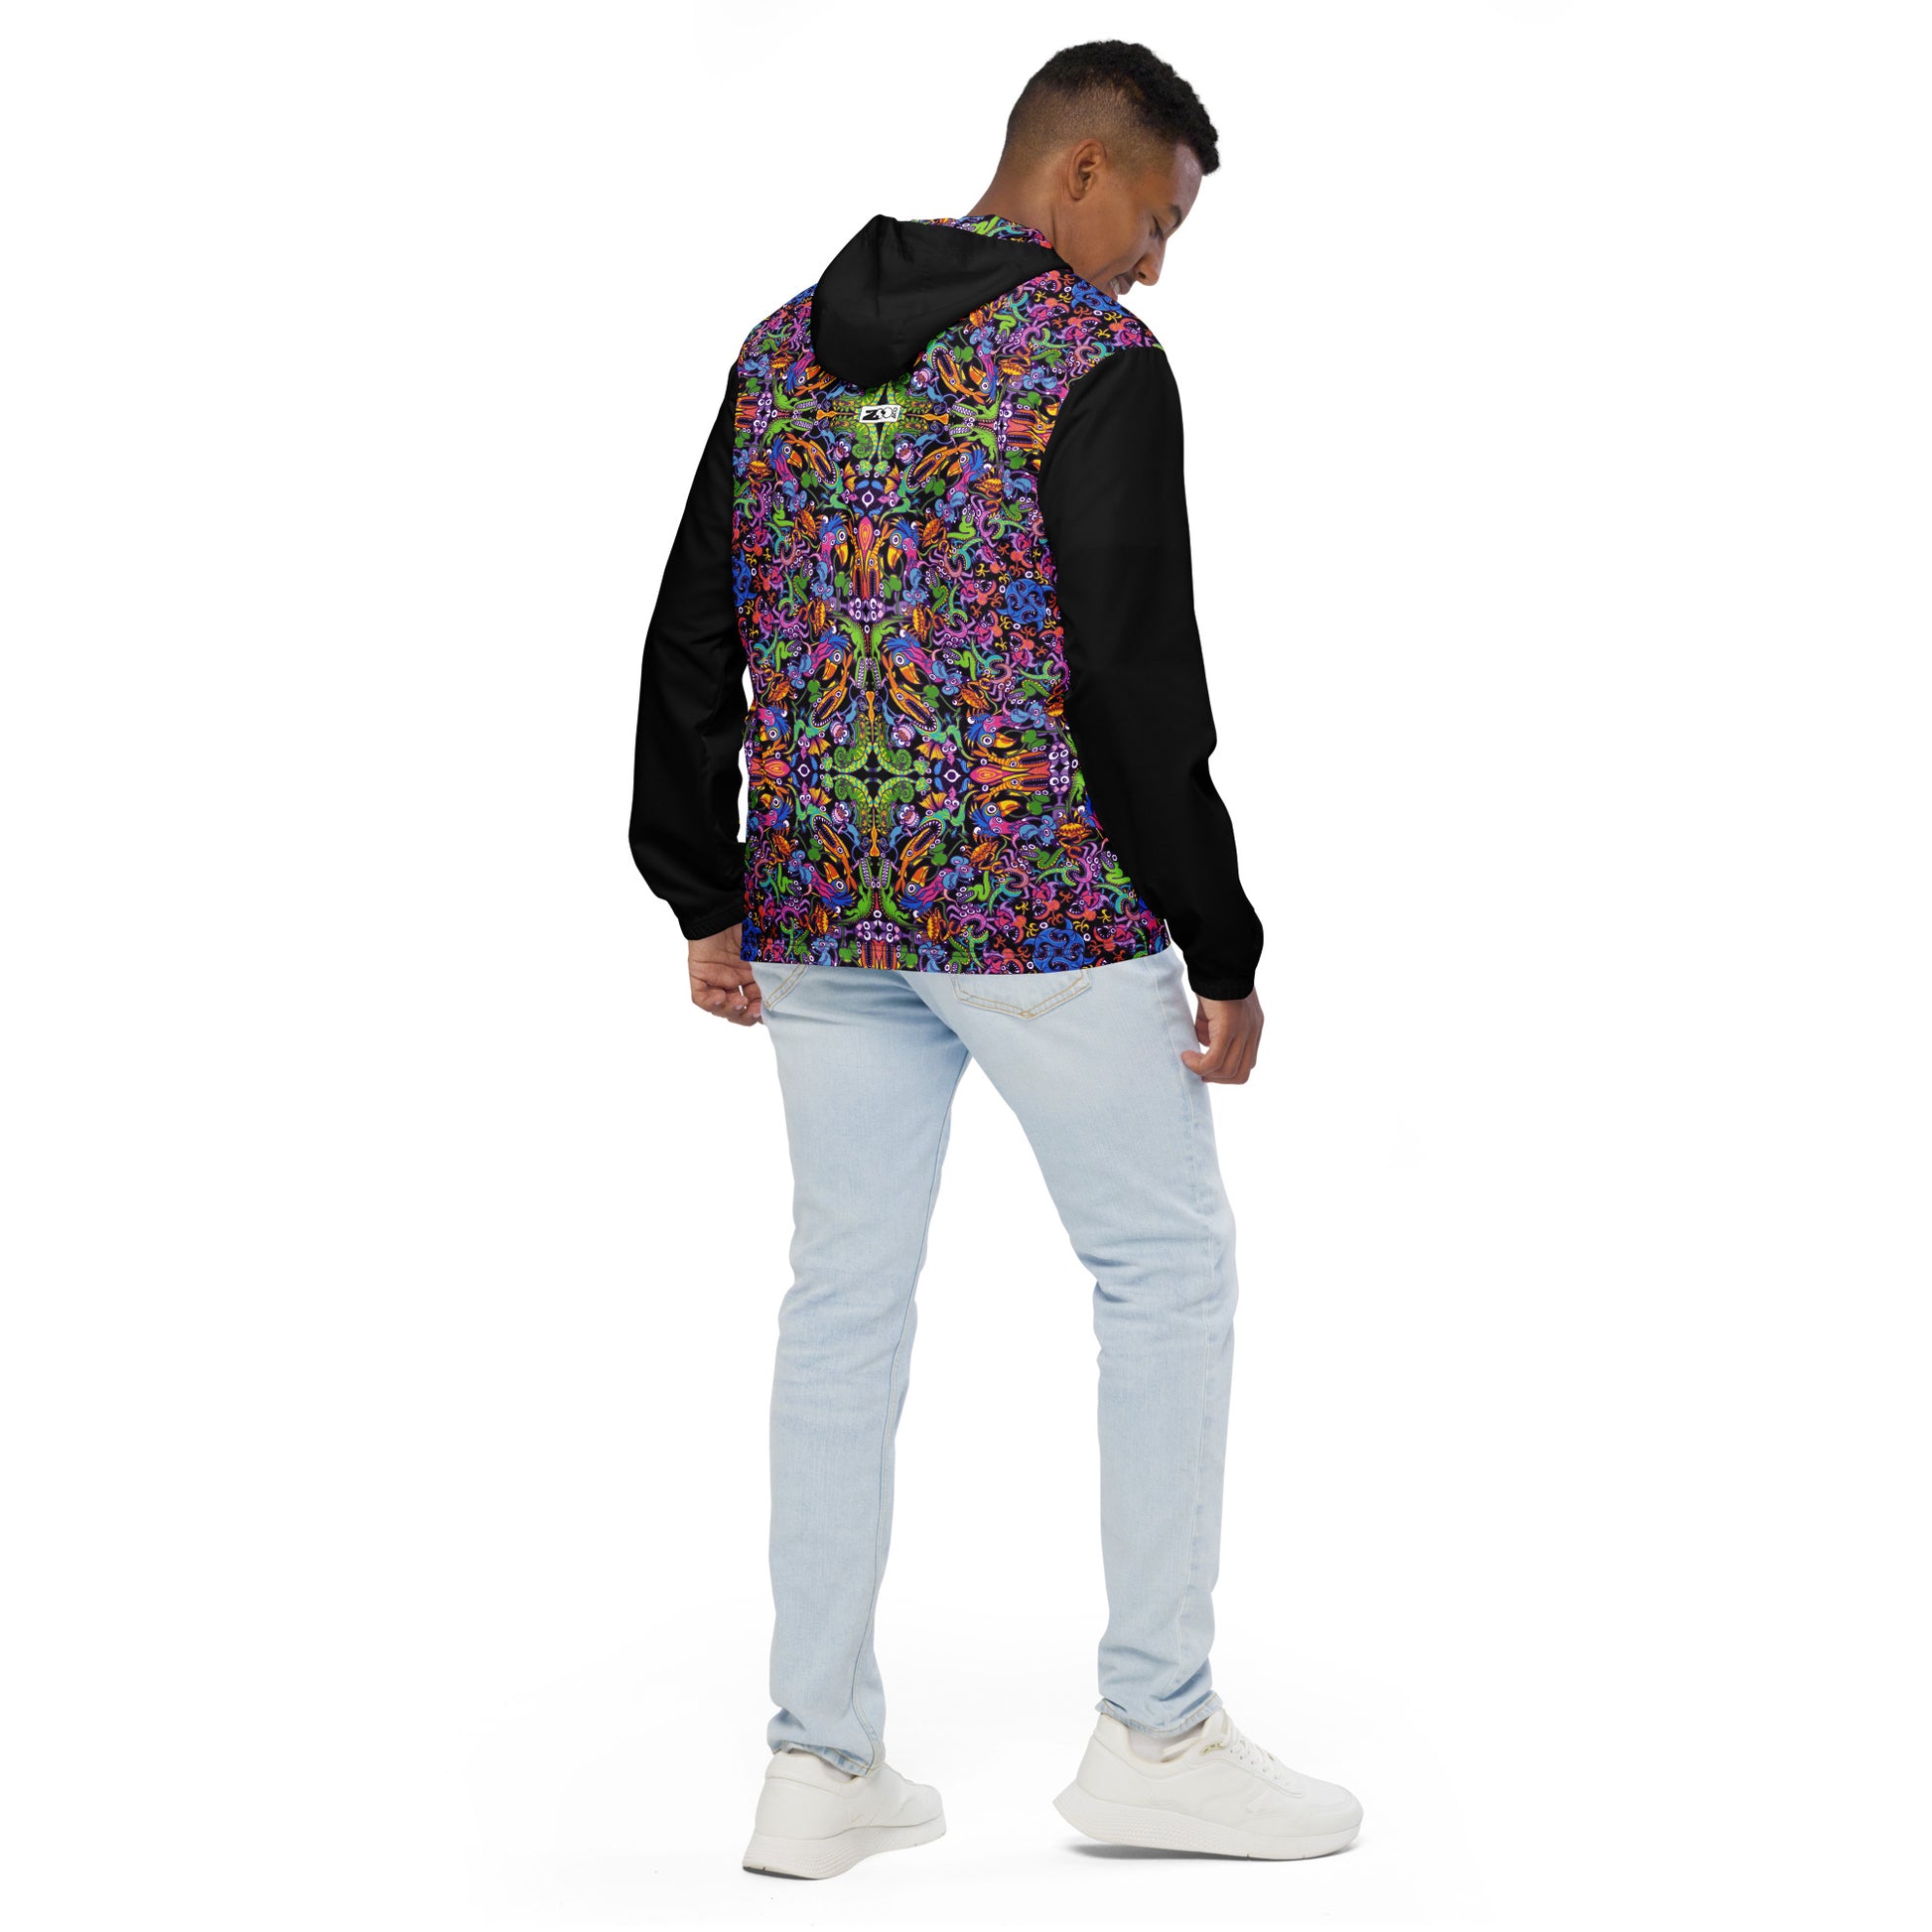 Eccentric critters in a lively festival - Men’s windbreaker. Back view